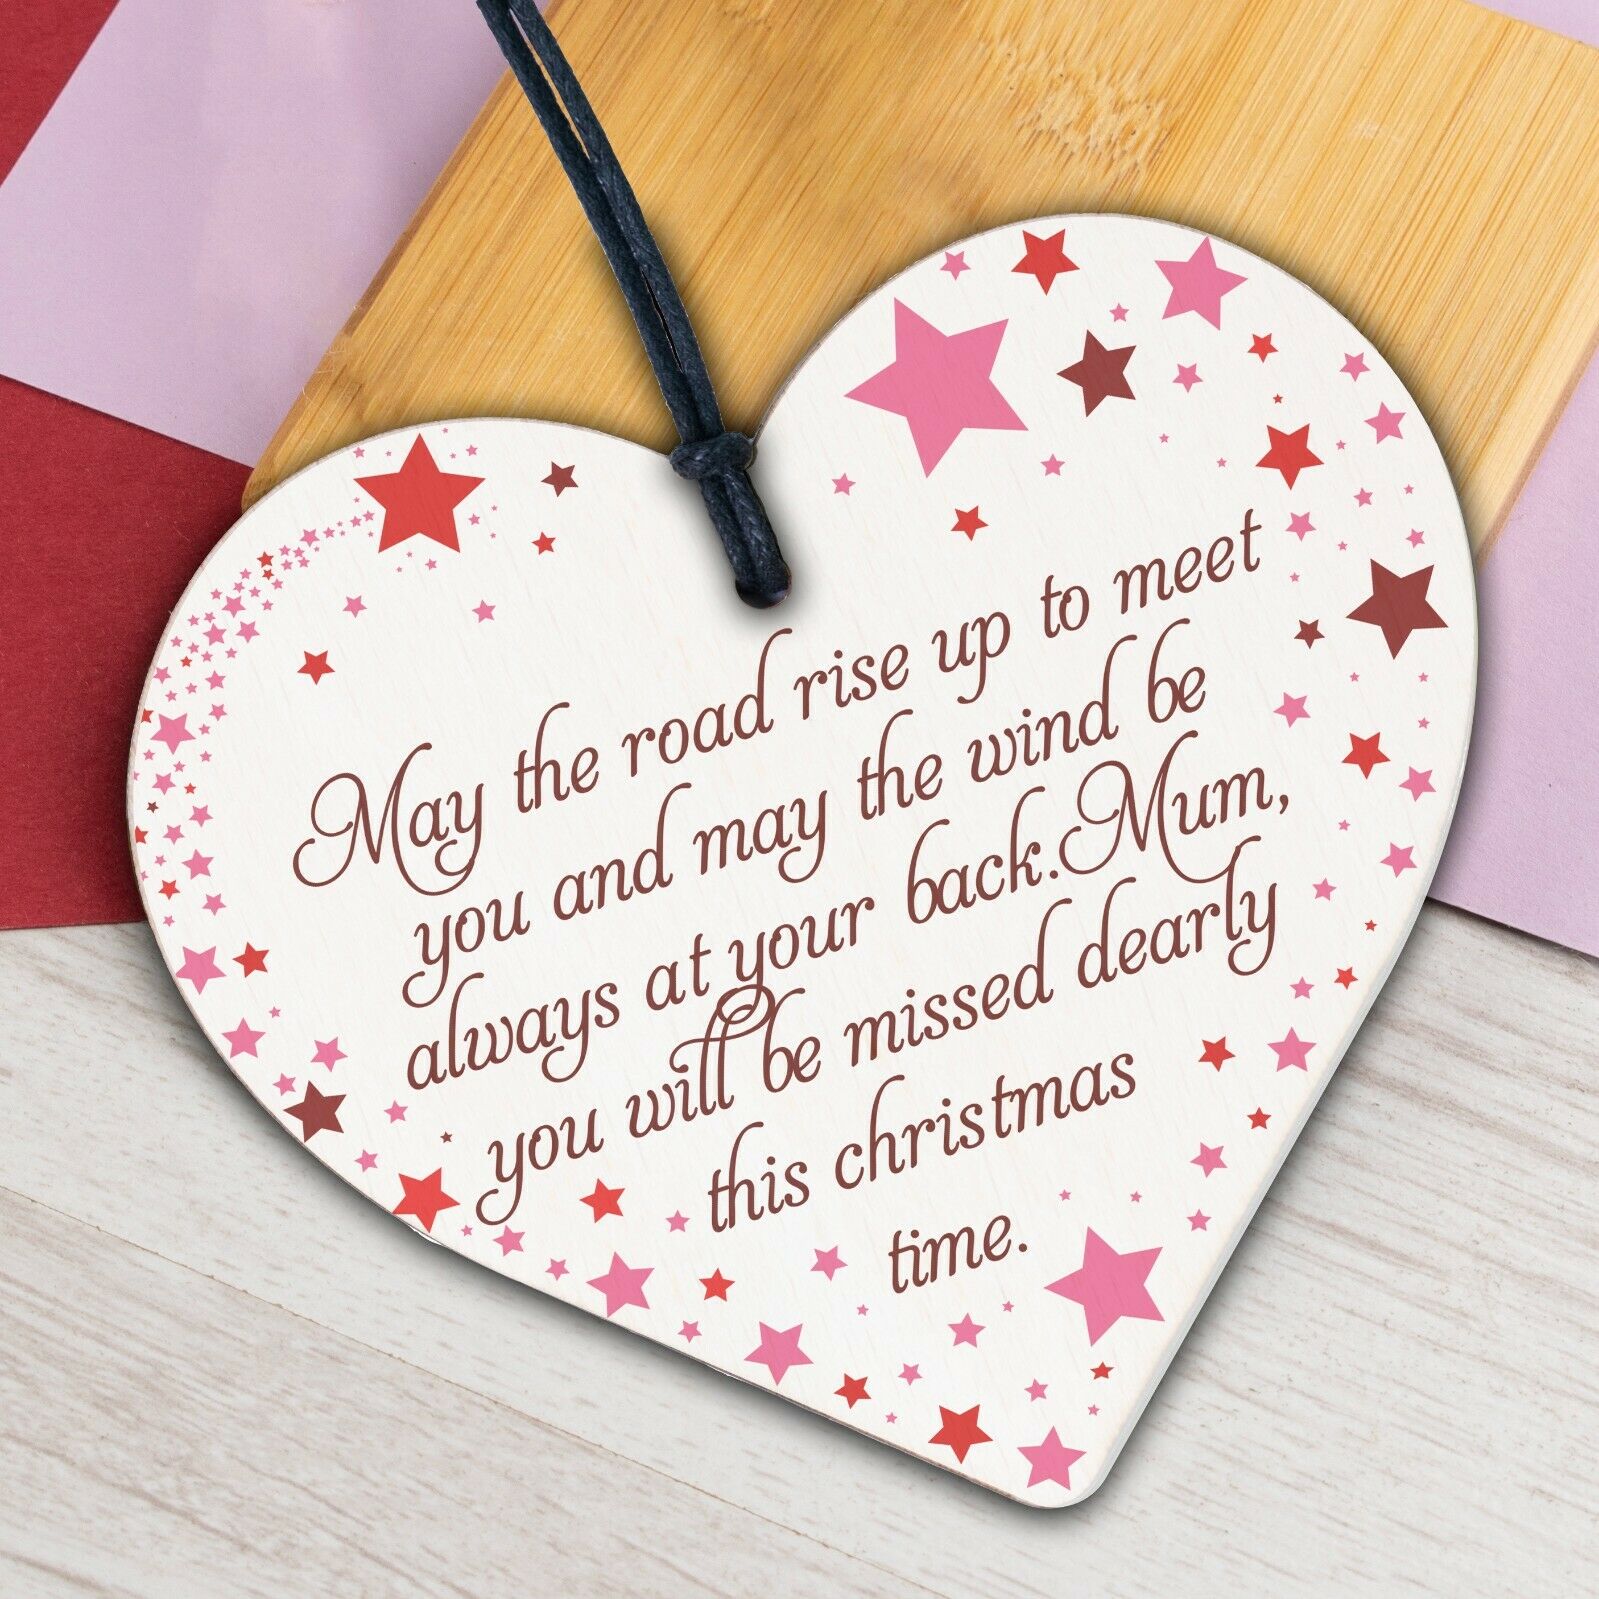 Finally You're Leaving! Wooden Hanging Heart Novelty Work Colleague Leaving Gift